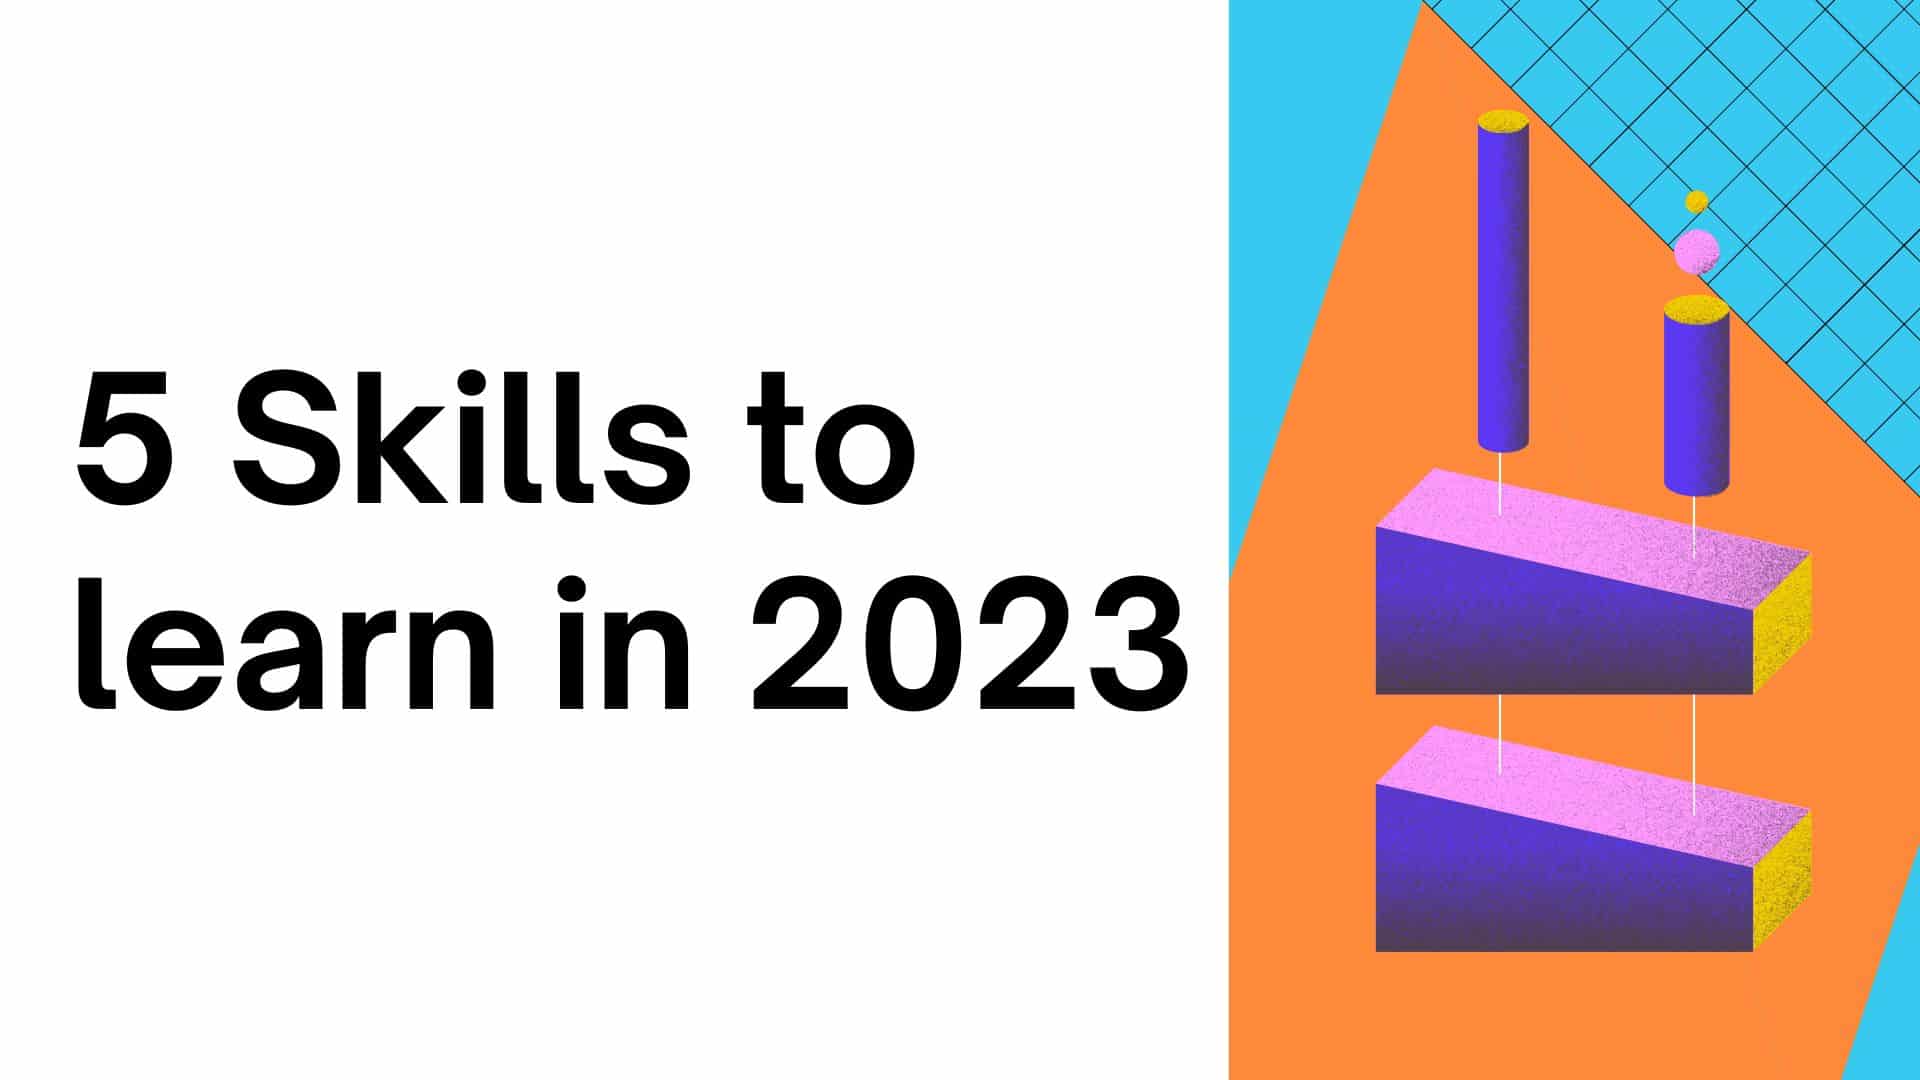 5 In-Demand Skills with low Competition on Fiverr, Upwork, and other online marketplaces in 2023